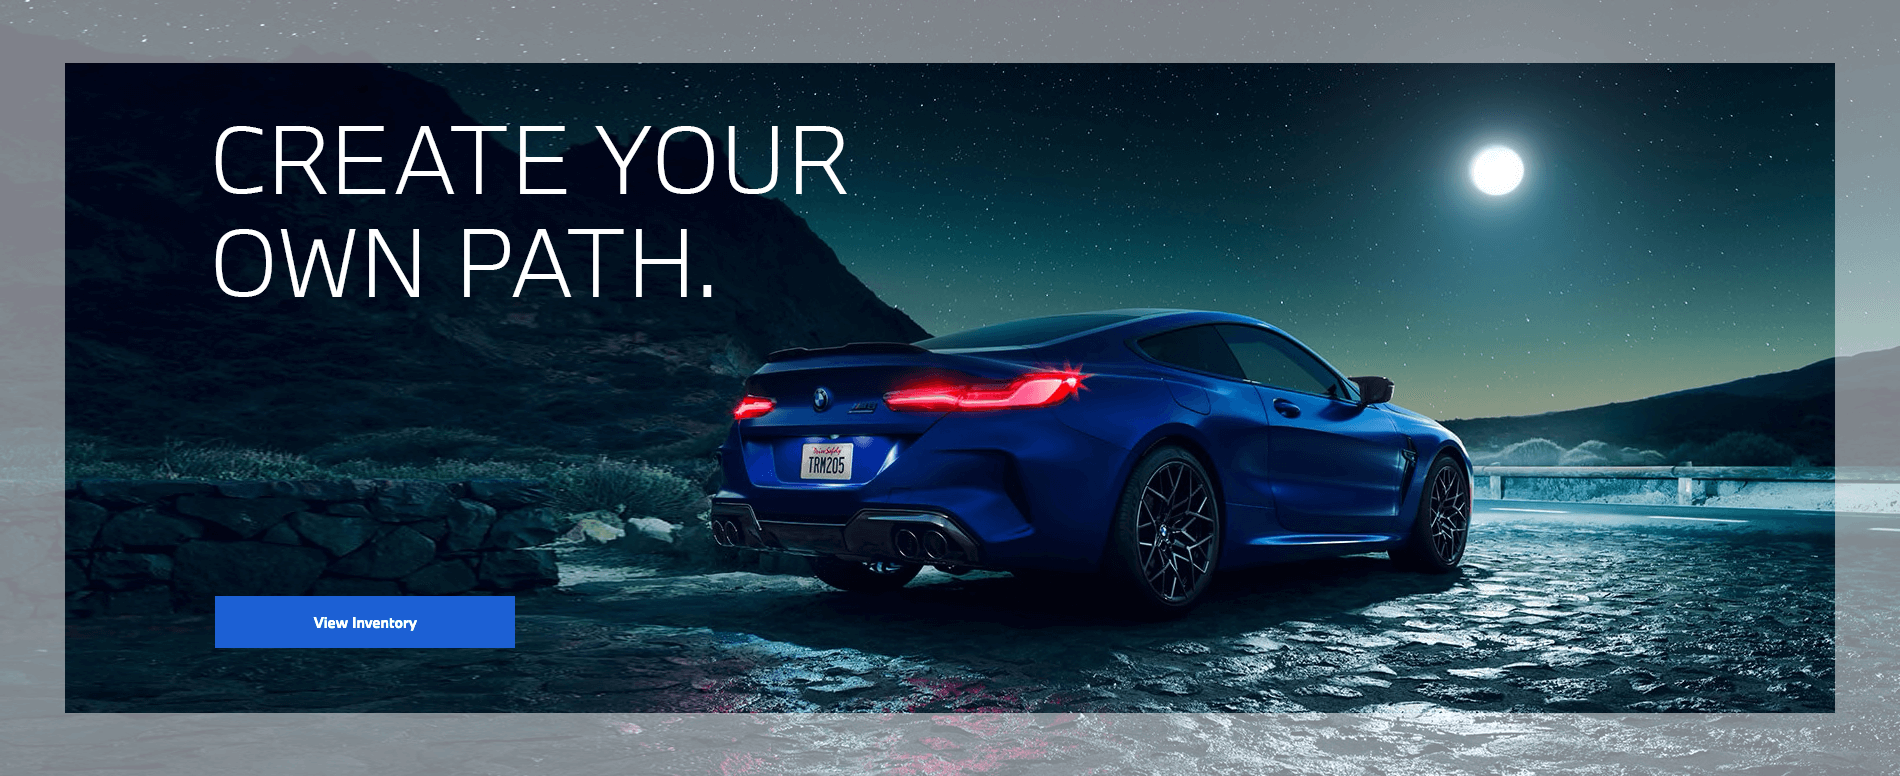 View Inventory. A BMW M8 parked by the side of a moonlit desert highway.